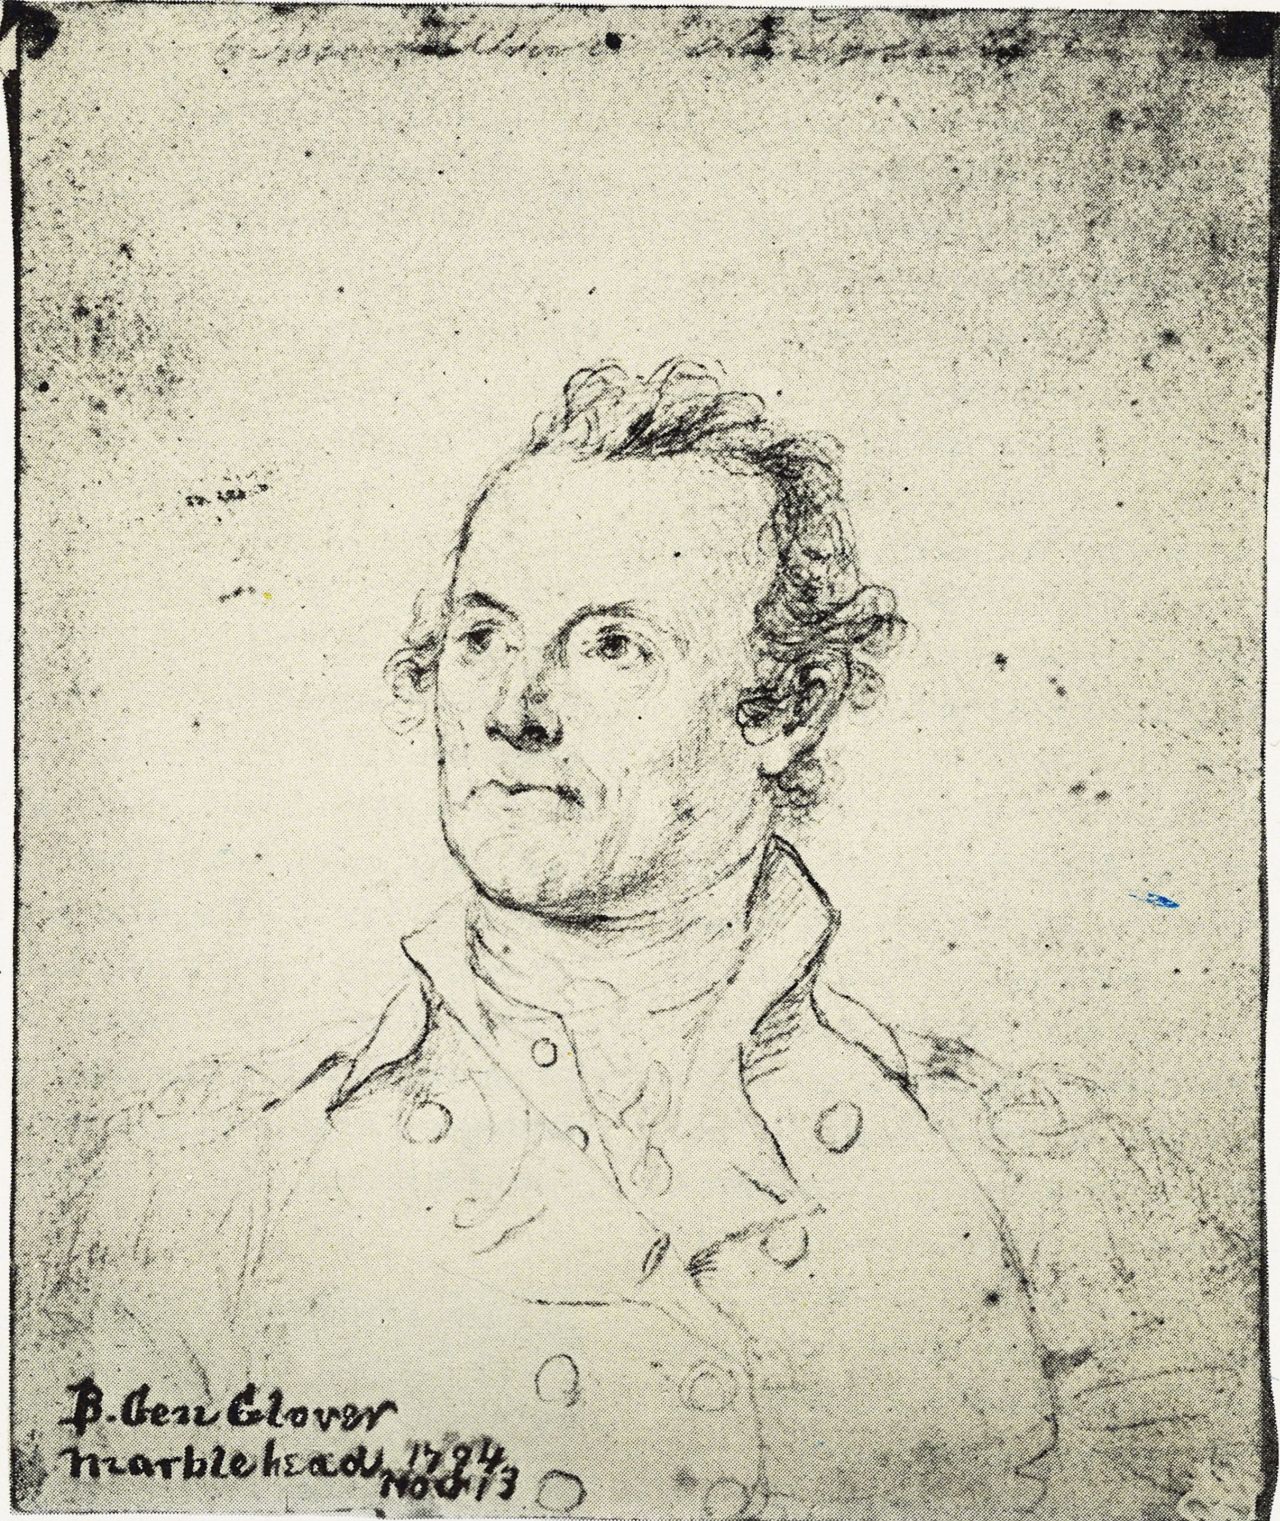 Glover was sketched by John Trumbull.